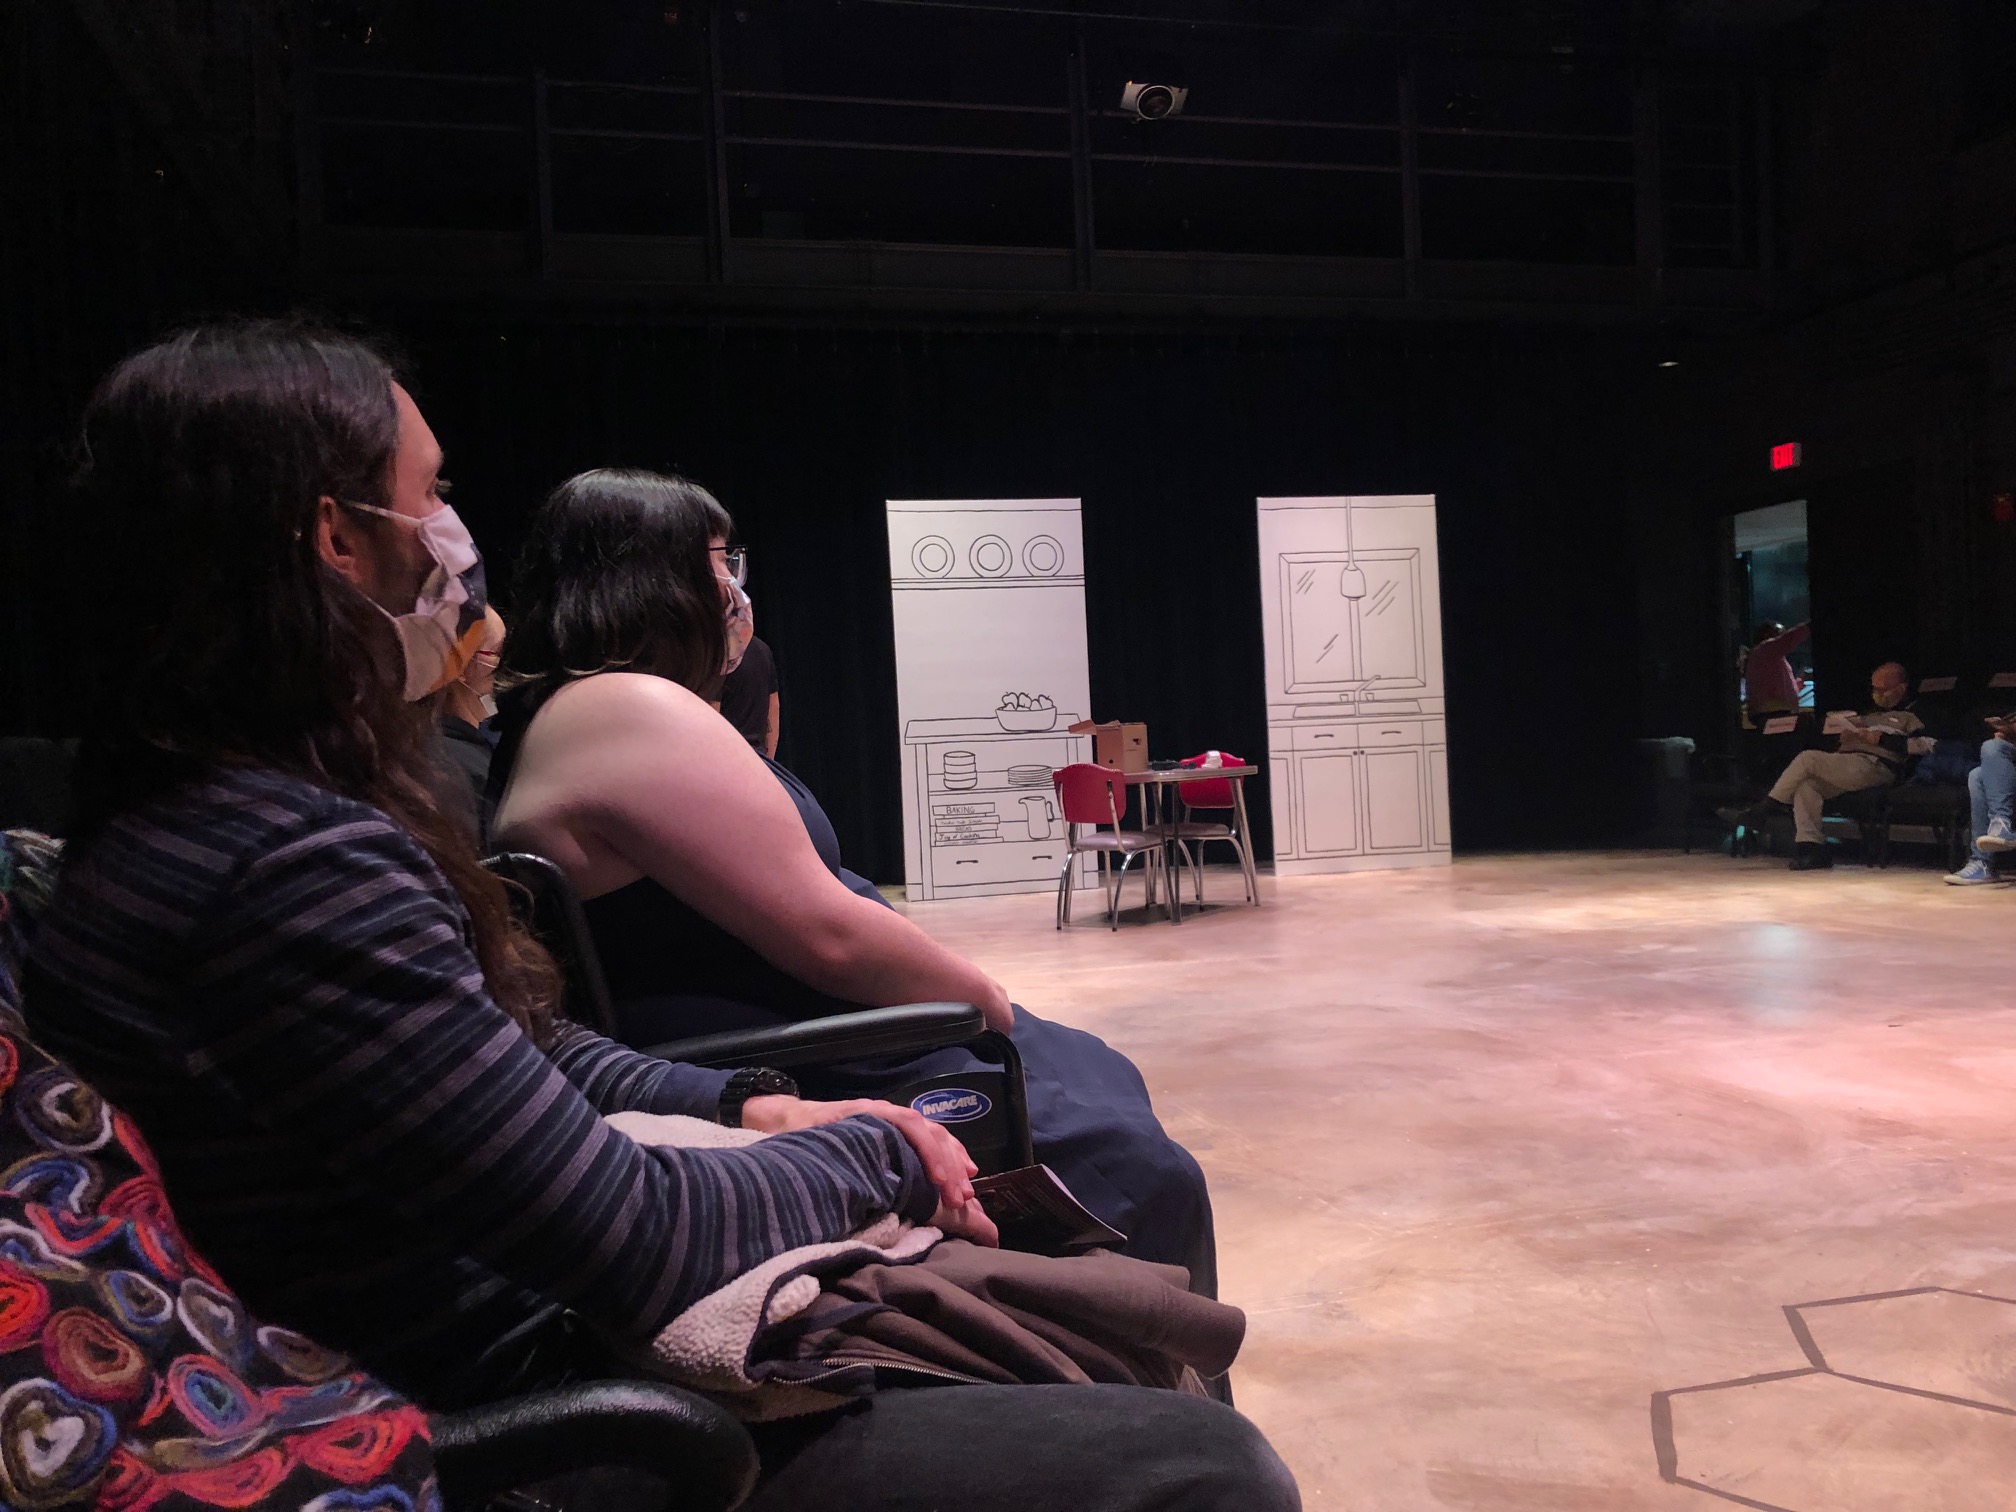 From the author's perspective in the audience, there is a set in the background of two tall white panels and a table with two chairs. Two audience members to the left of the author sit facing the stage. Photo by Alyssa Buckley.